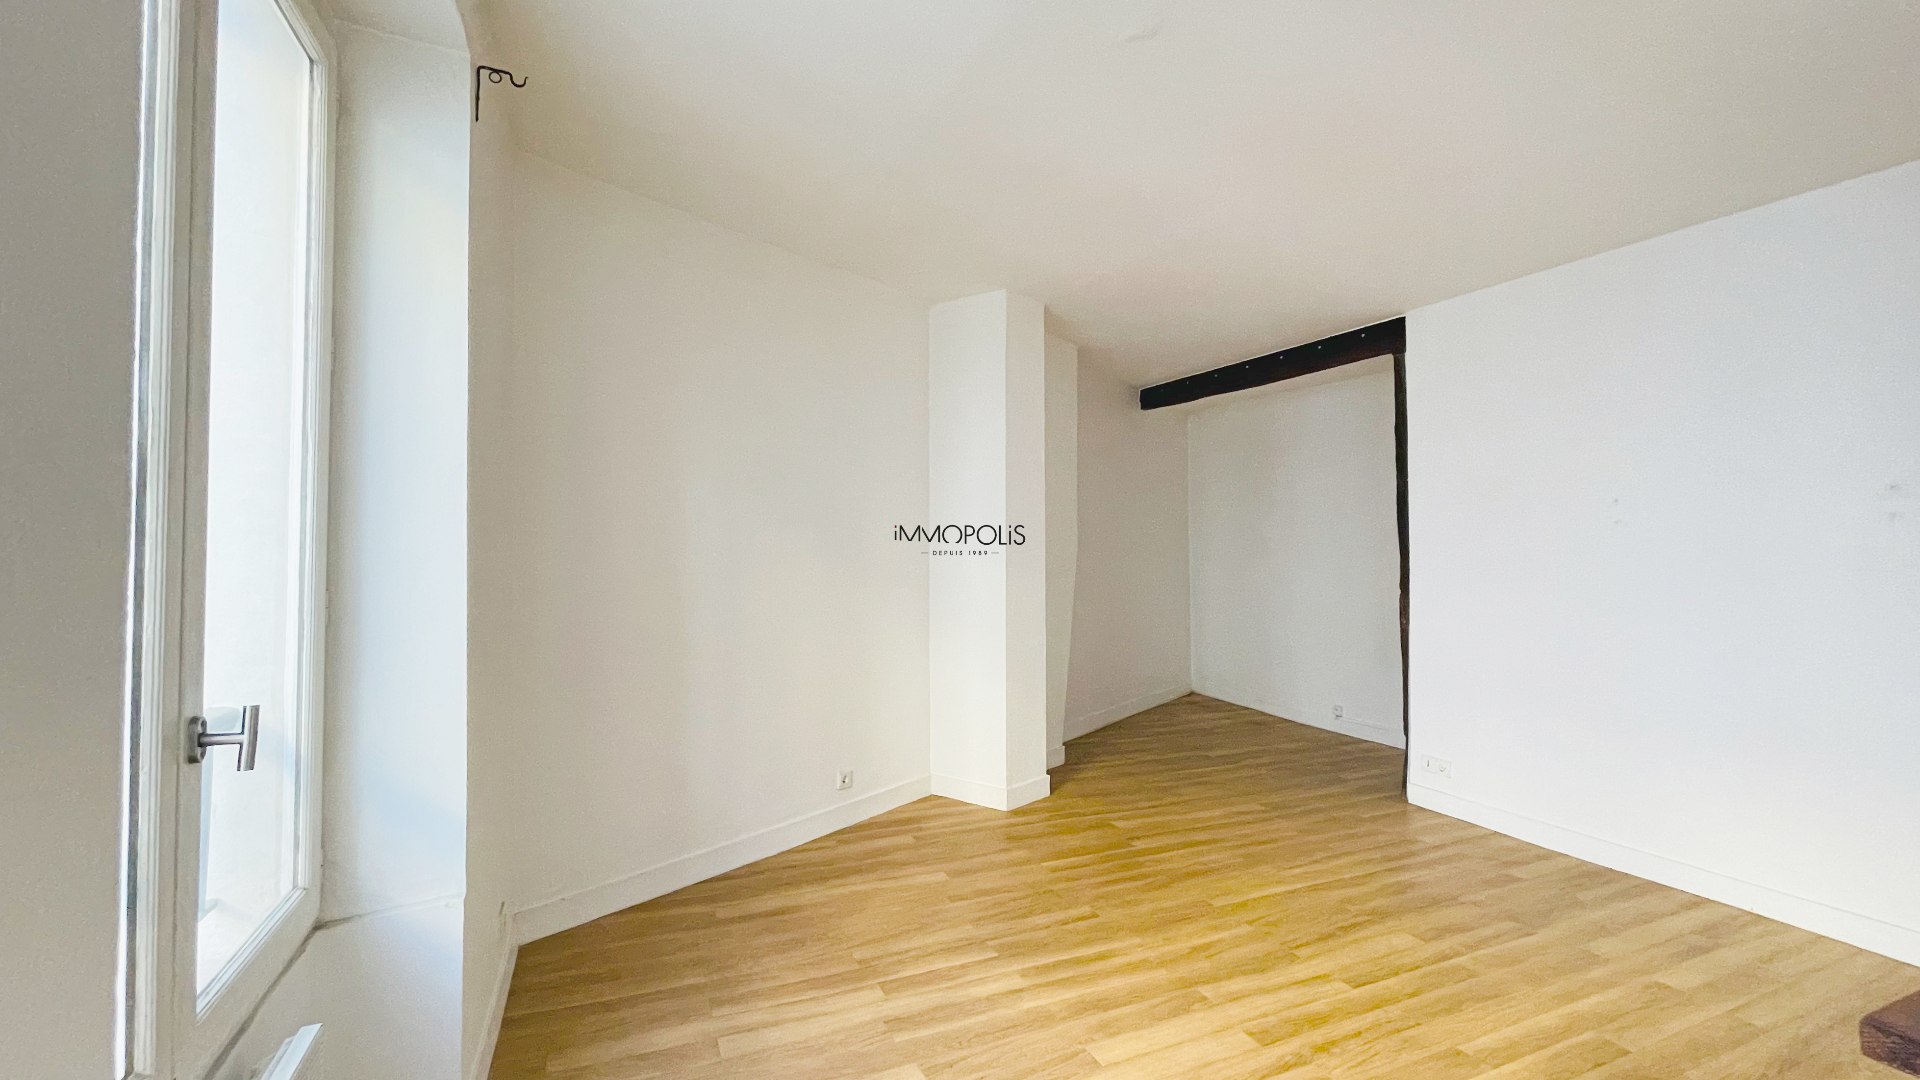 Beautiful studio in Montmartre, 30 m² without loss of space located in a rebuilded building 5